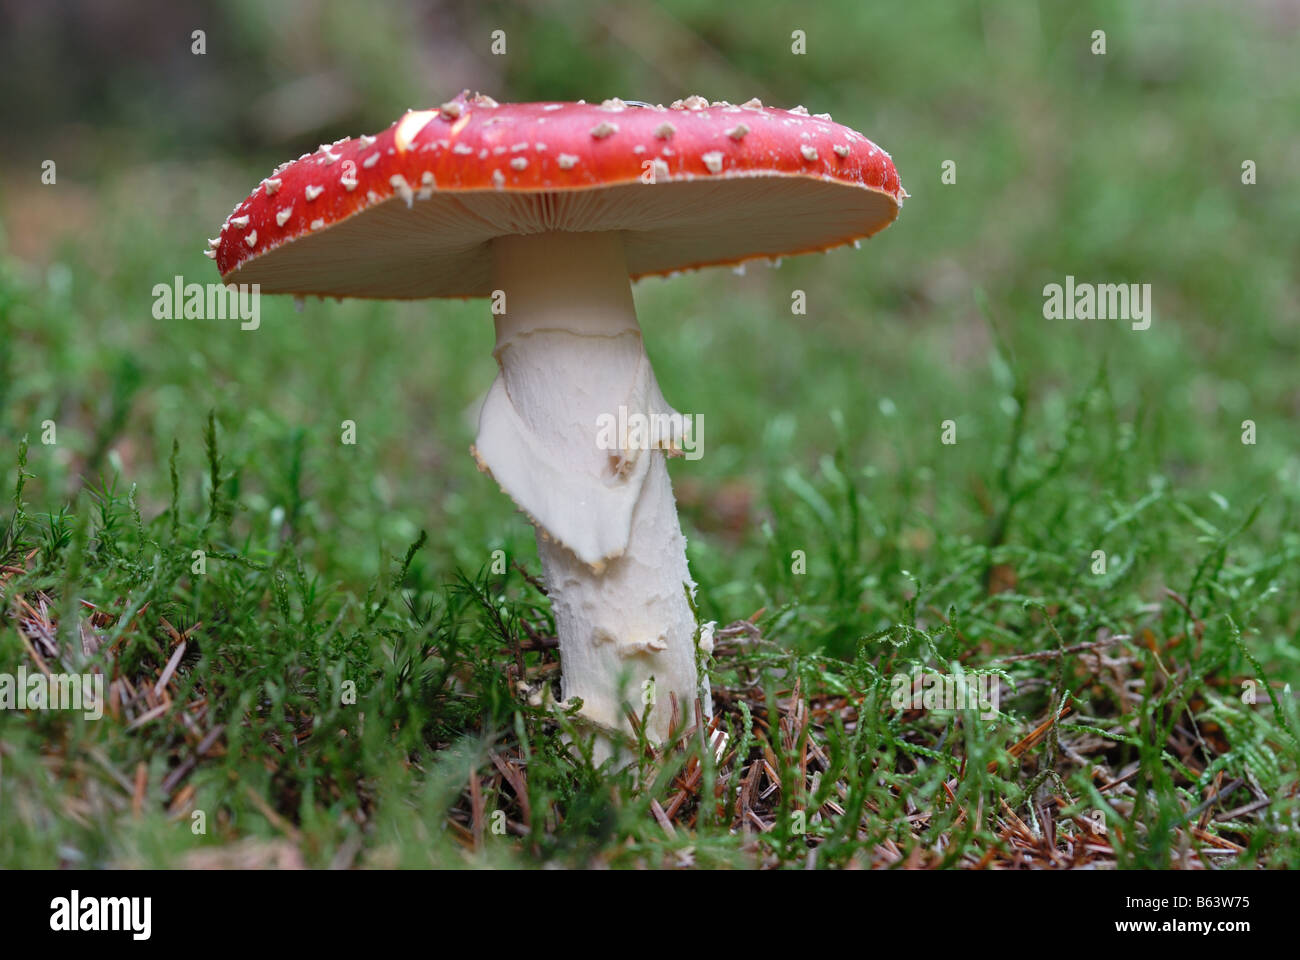 Champignons Agaric Fly Banque D'Images